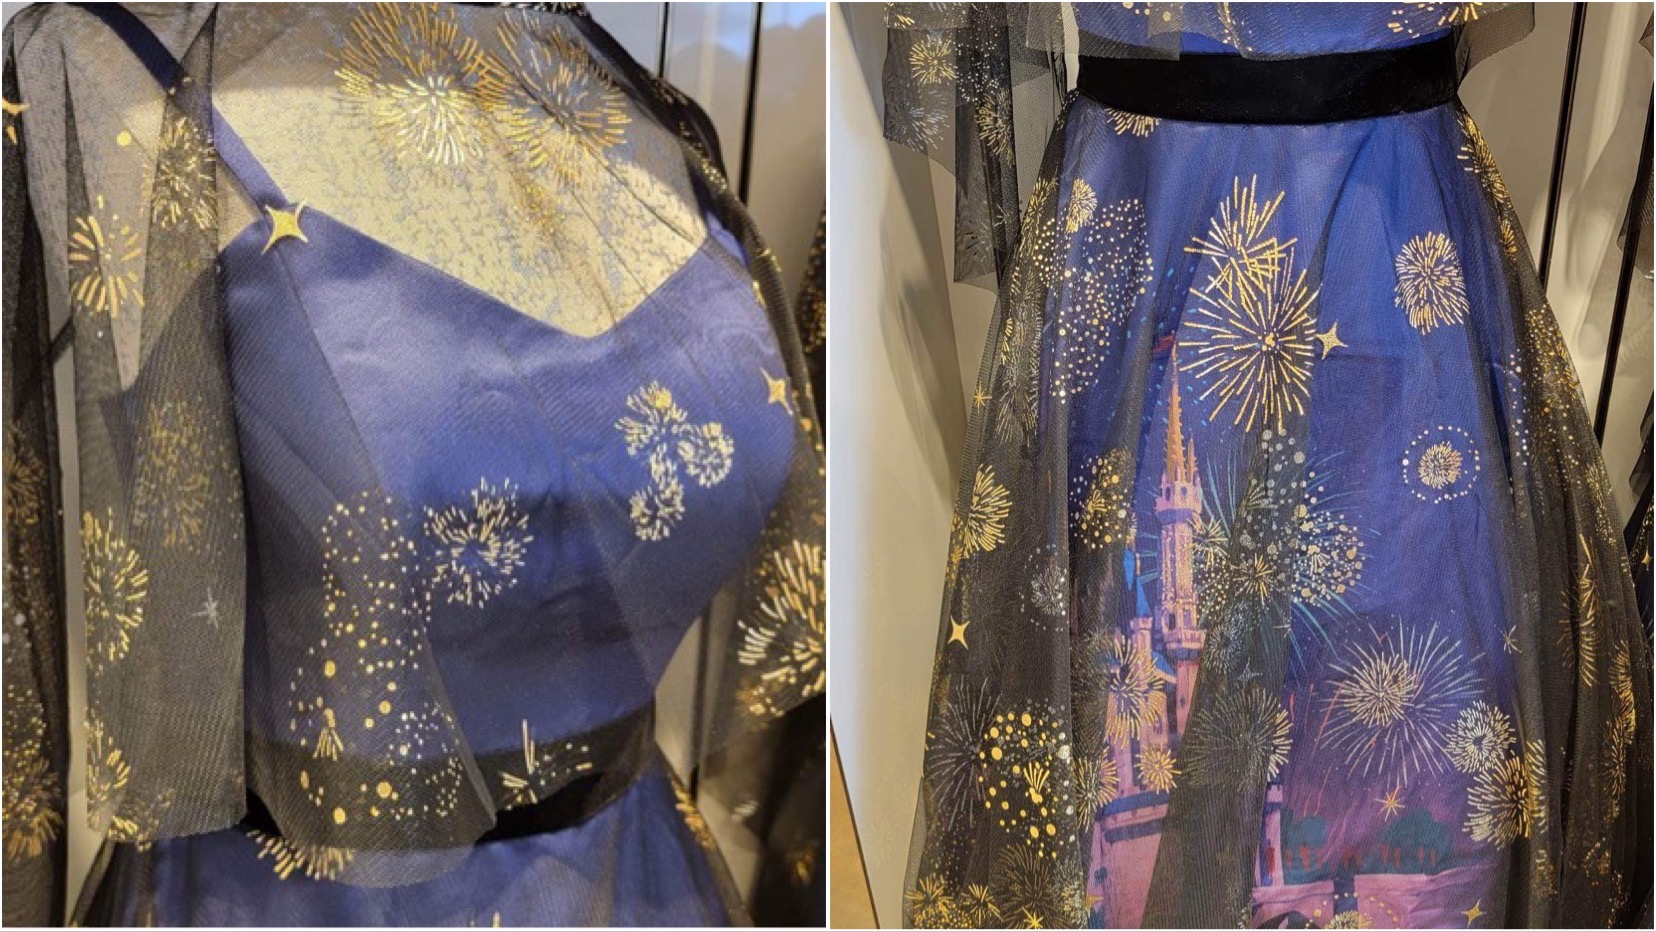 New Cinderella Castle Fireworks Dress To Light Up Any Occasion!